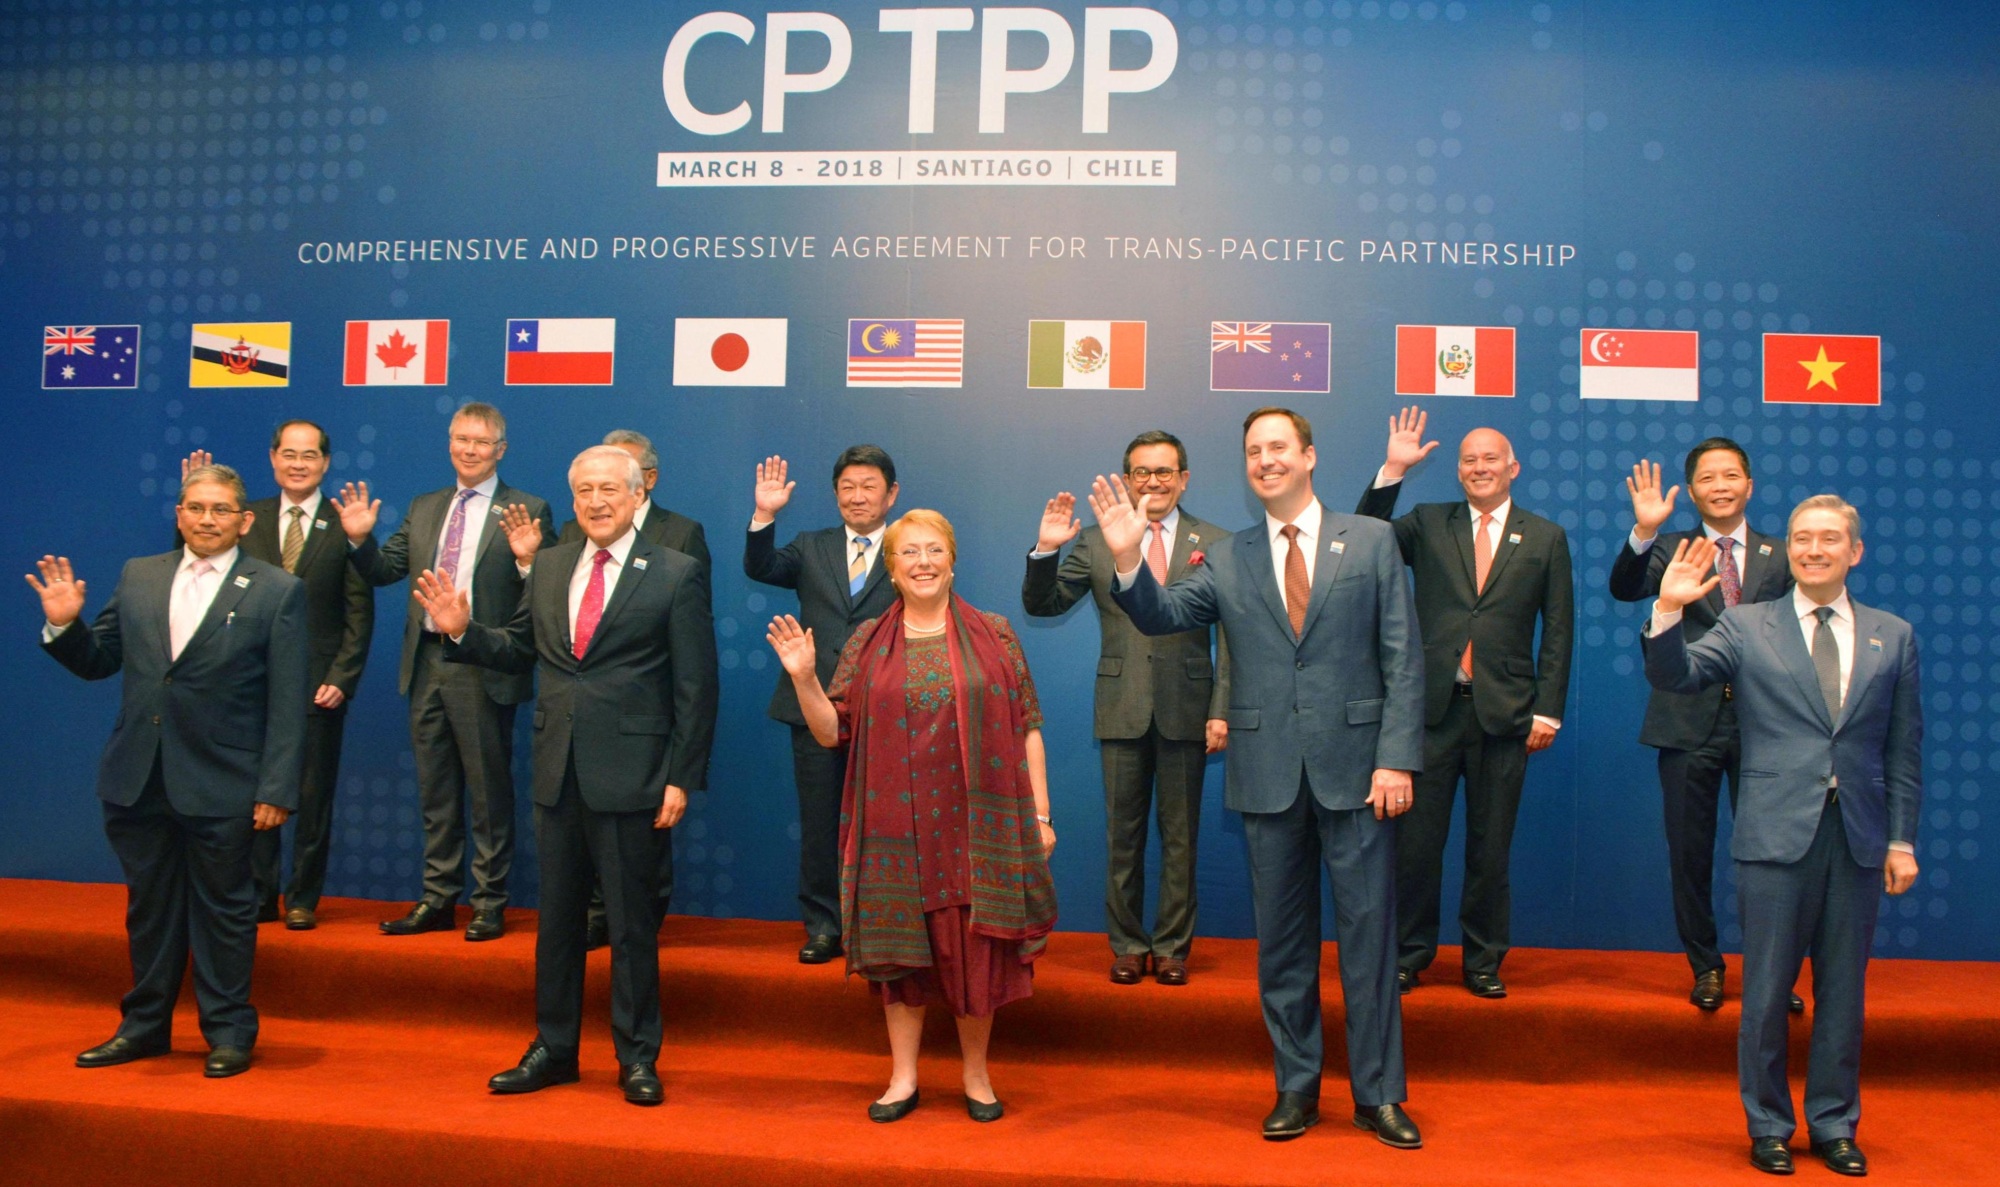 Ministers of the Trans-Pacific Partnership member countries pose for a photo in Santiago Thursday prior to the signing of an agreement without the United States. | KYODO